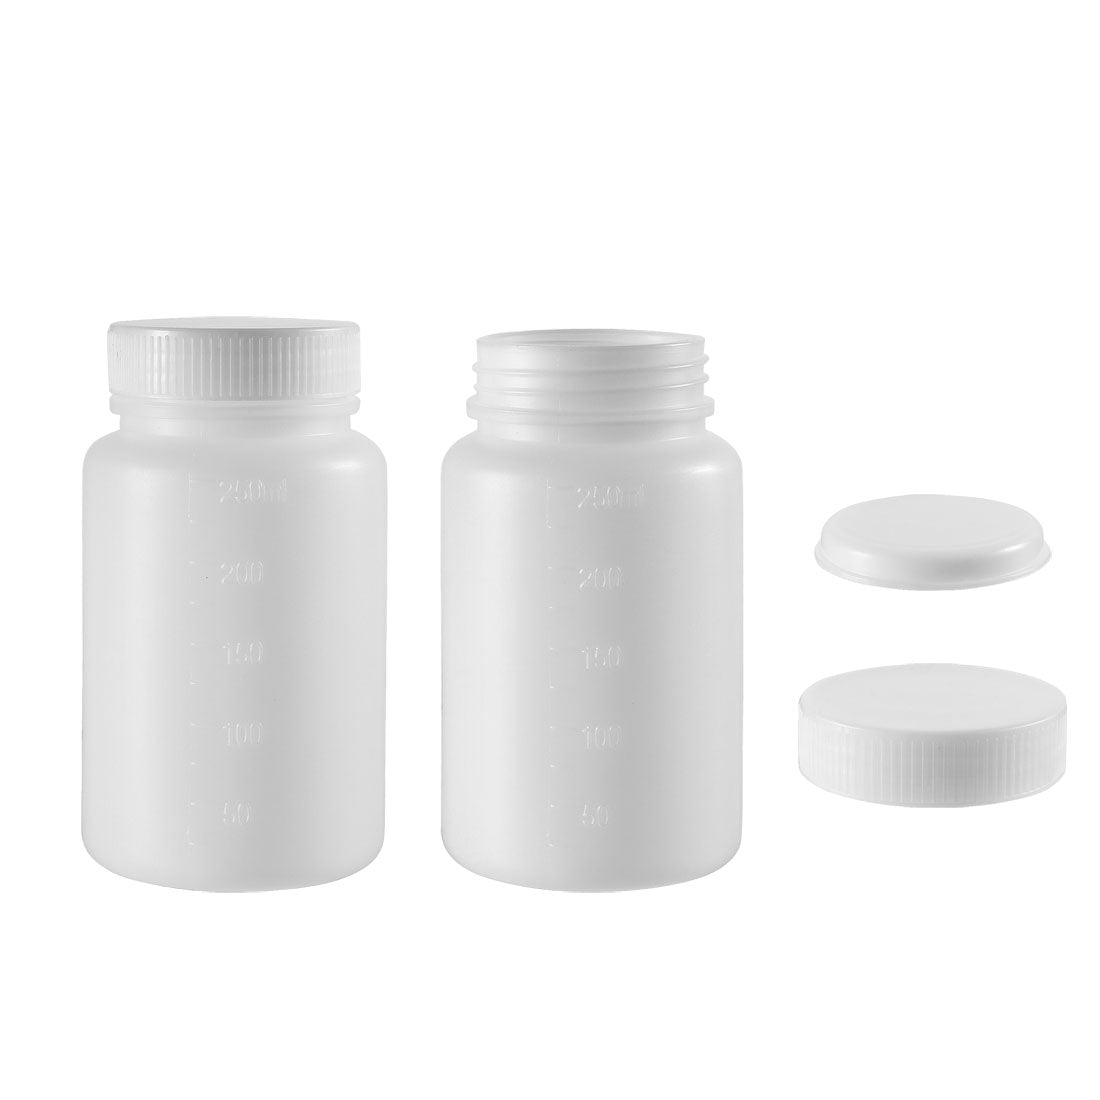 uxcell Uxcell Plastic Lab Chemical Reagent Bottle 250ml/8.5oz Wide Mouth Sample Sealing Liquid Storage Container 2pcs